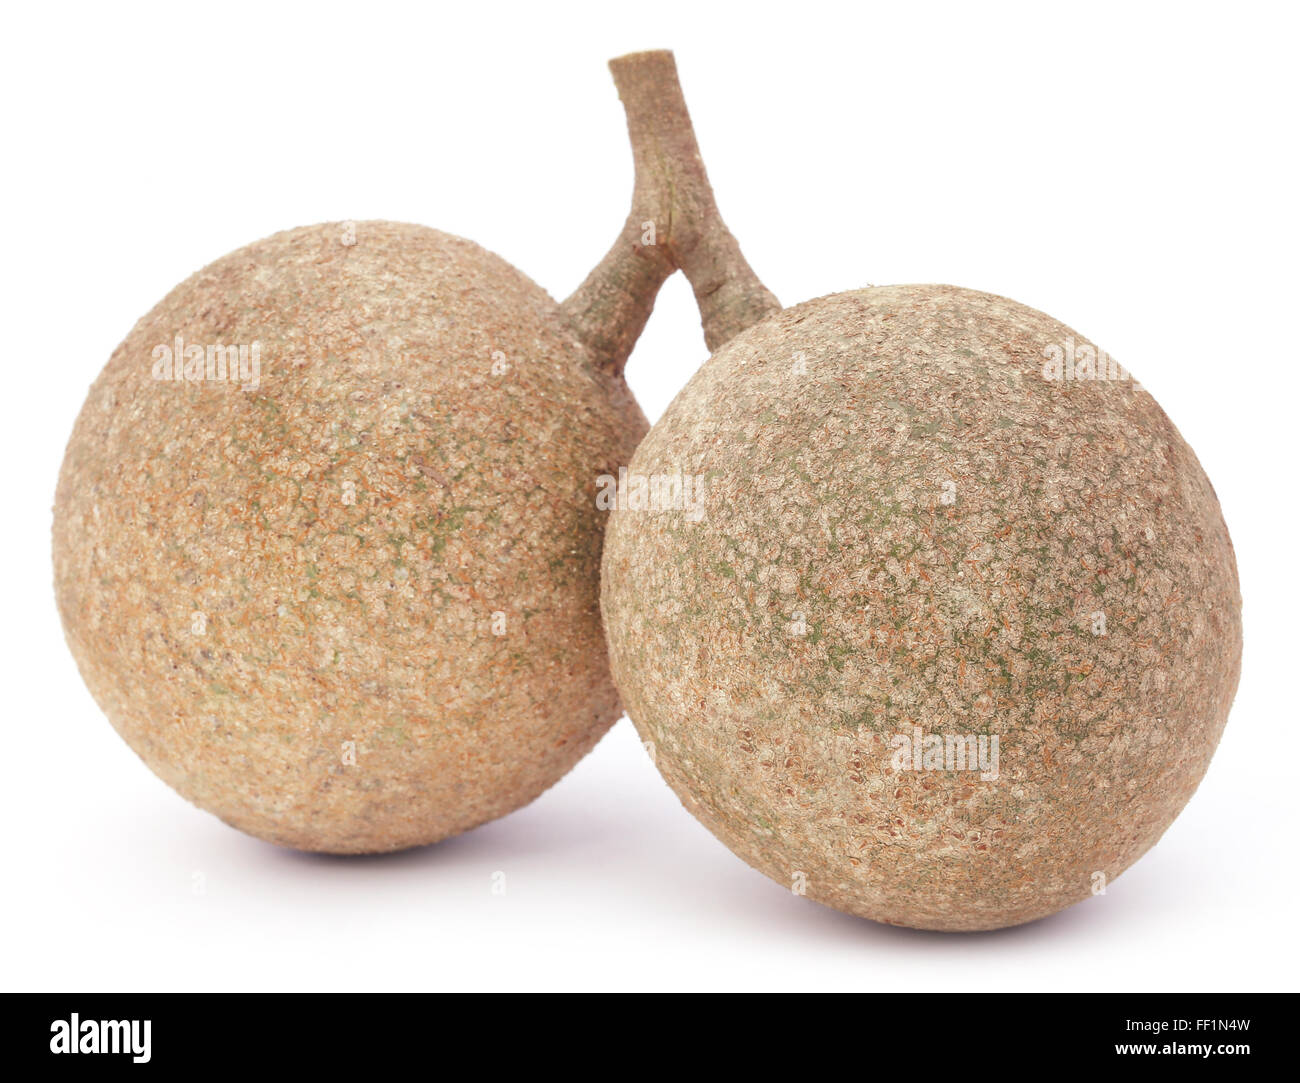 Pair of wood apples or kod bel of Southeast Asia Stock Photo